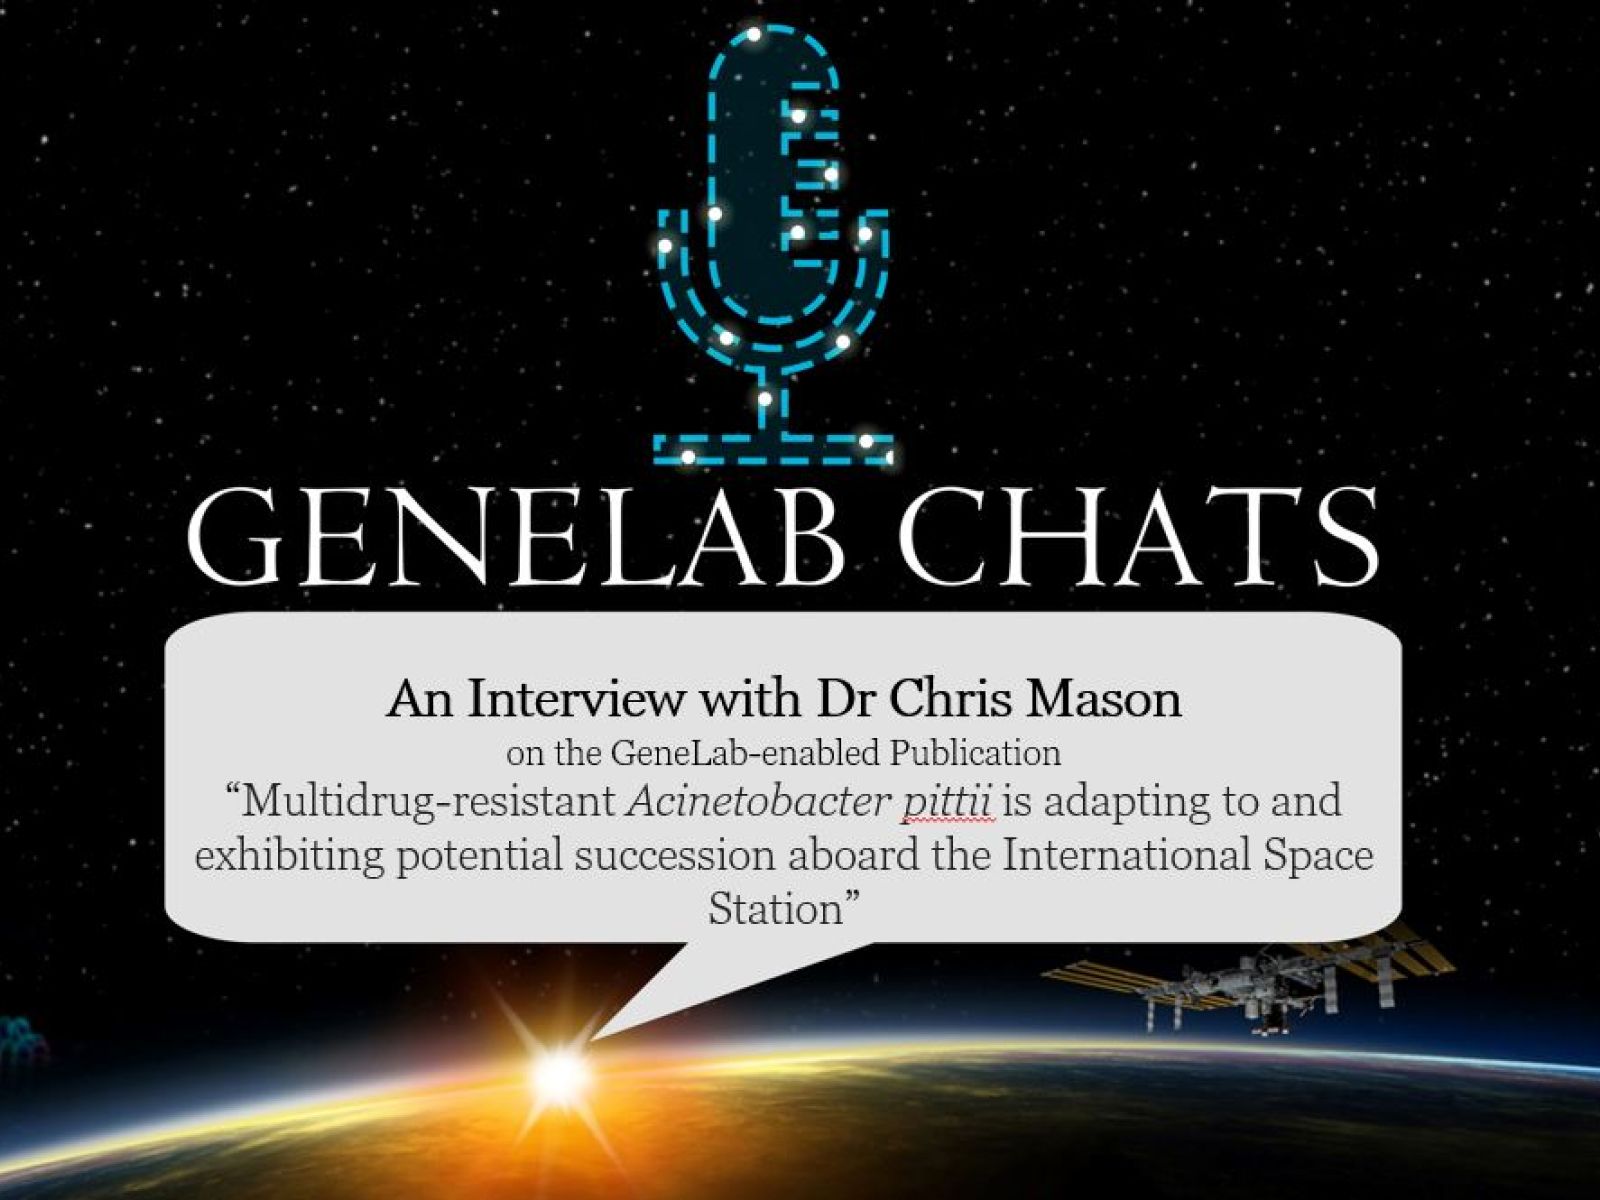 GeneLab Chats Title Slide for Dr Christopher Mason's "Multidrug-resistant Acinetobacter pittii is adapting to and exhibiting potential succession aboard the International Space Station."